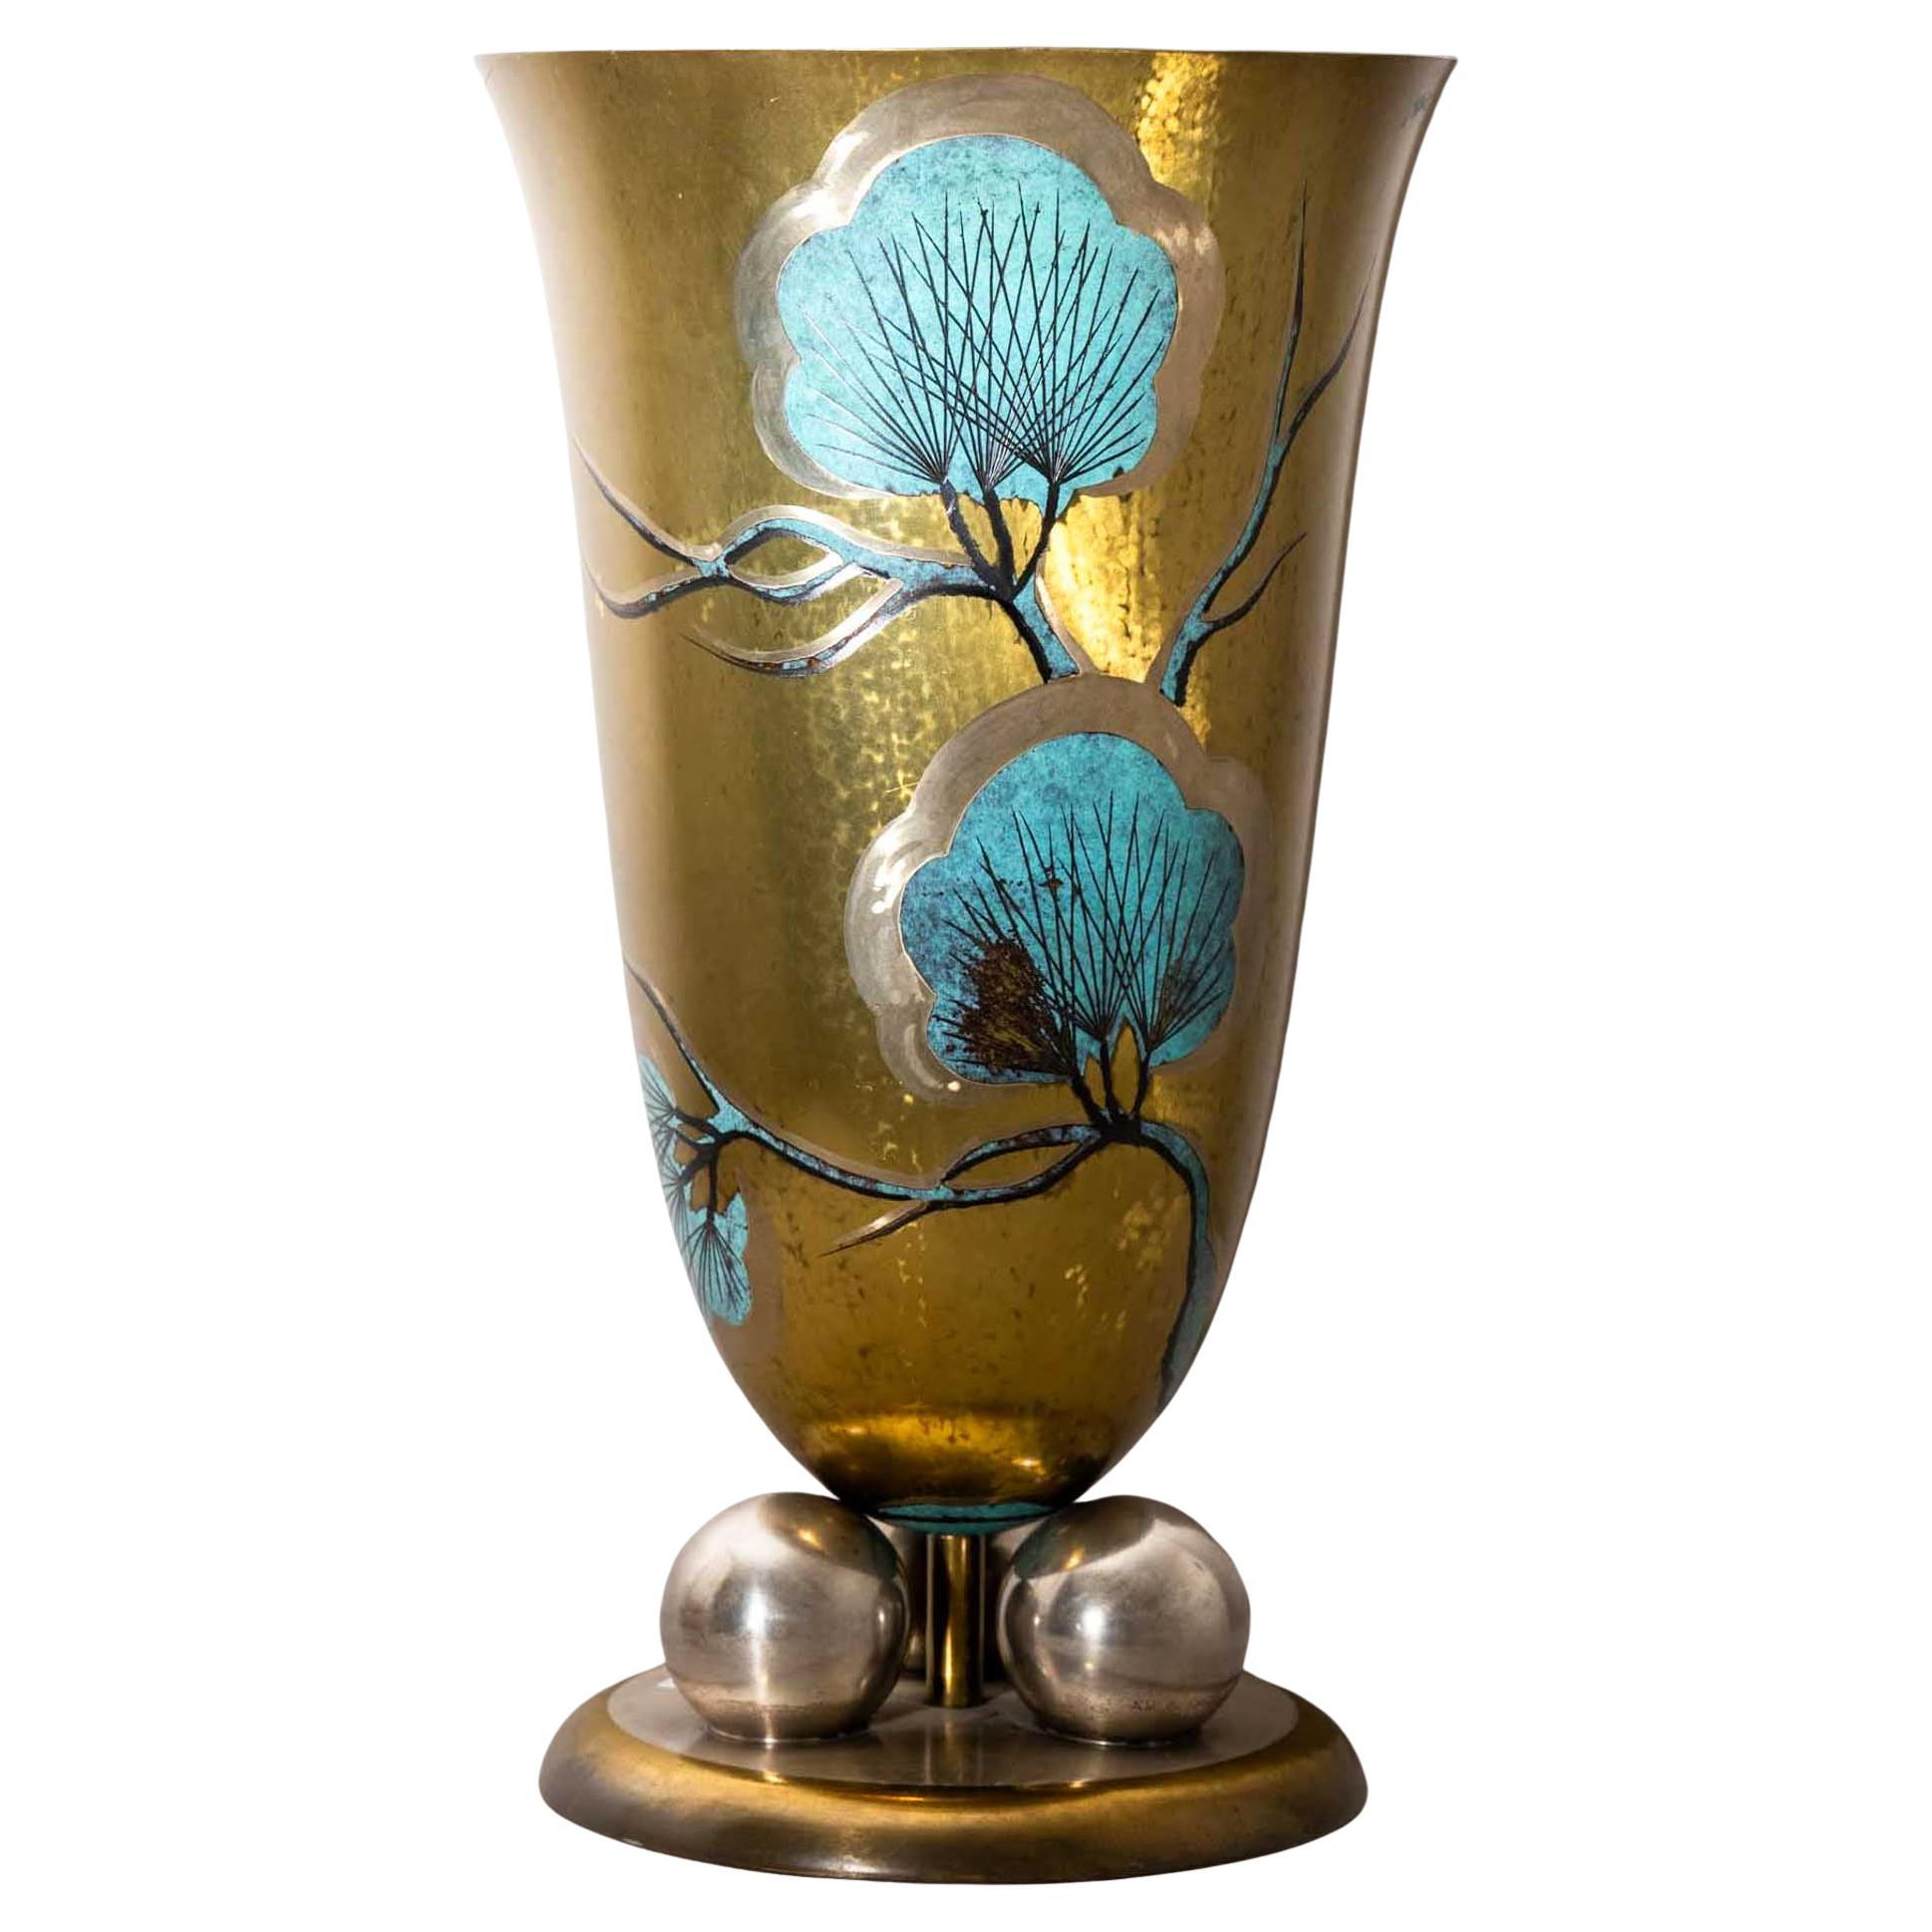 Large WMF Vase with Pine Branch Décor, 1920s/30s For Sale